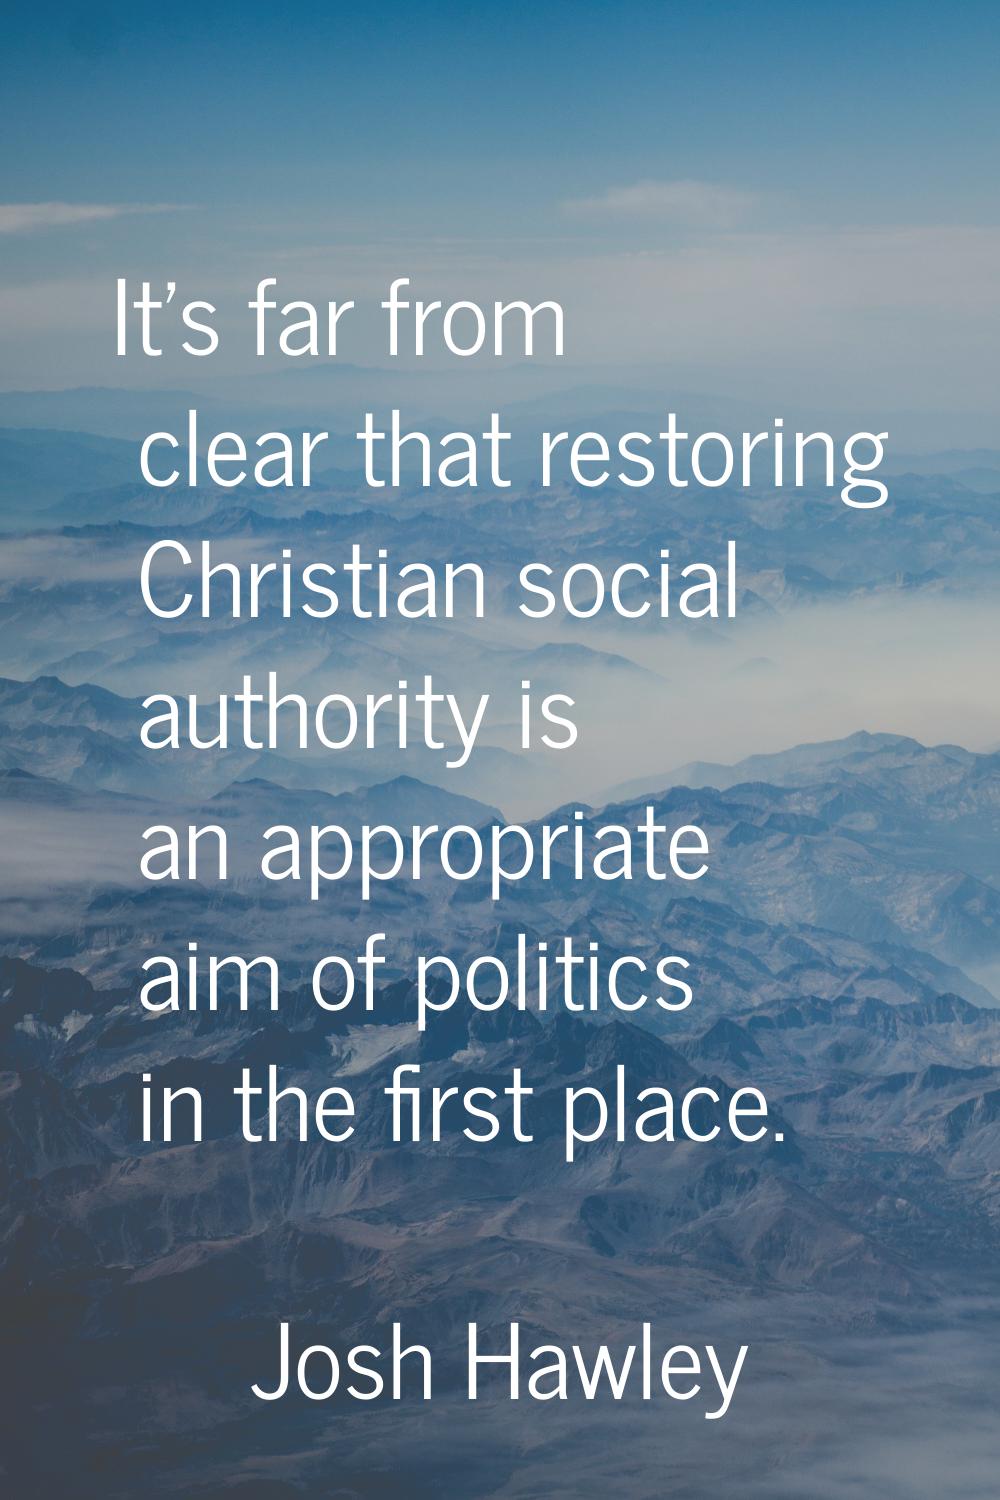 It's far from clear that restoring Christian social authority is an appropriate aim of politics in 